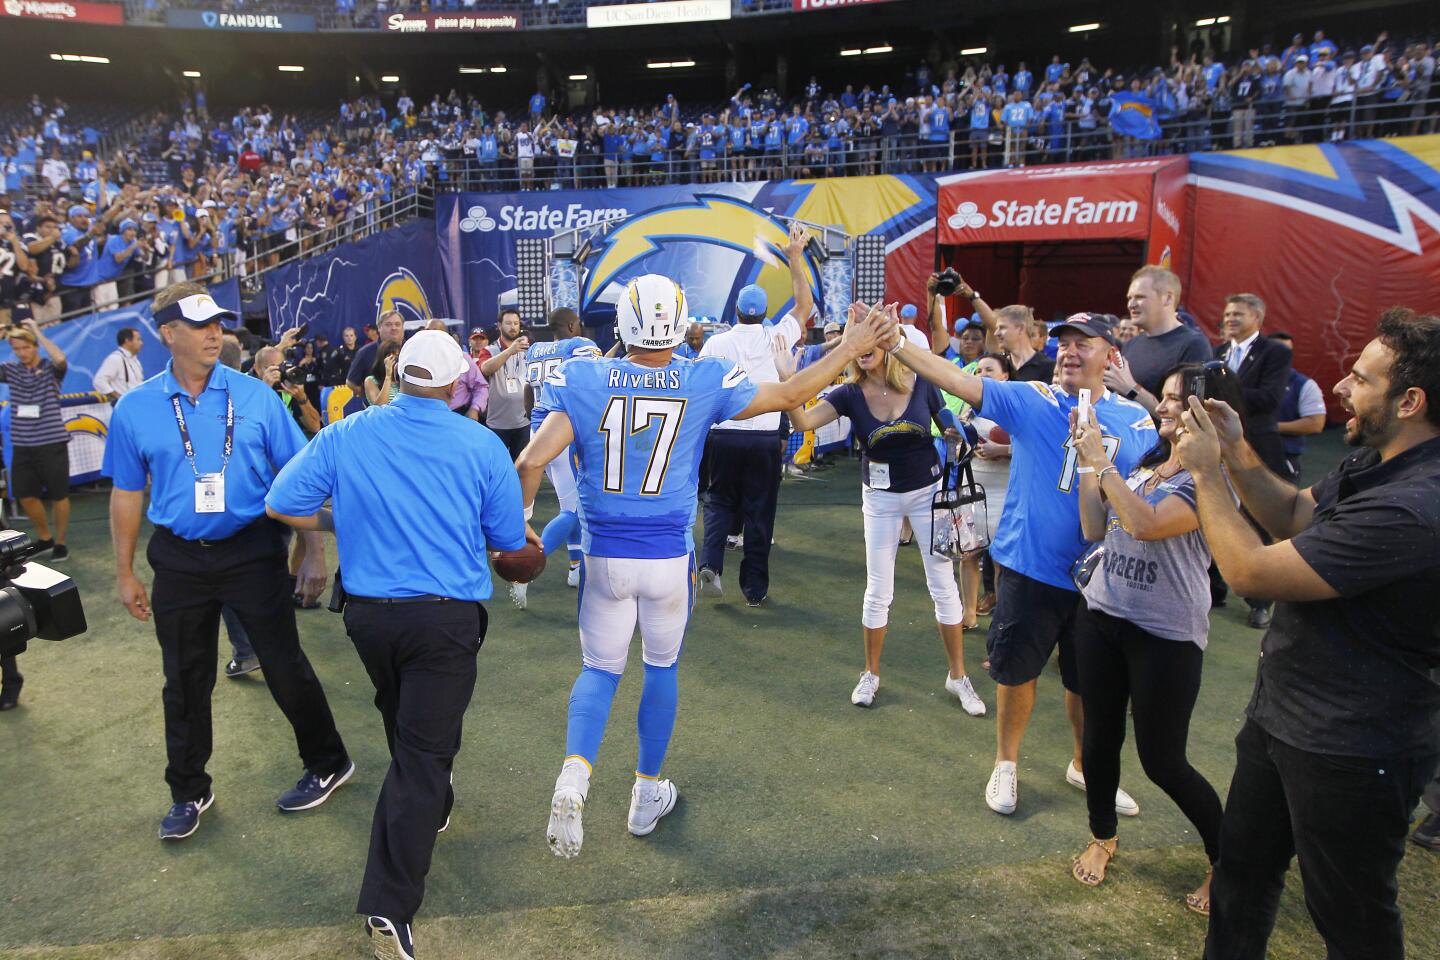 Chargers vs Titans 11/6/16